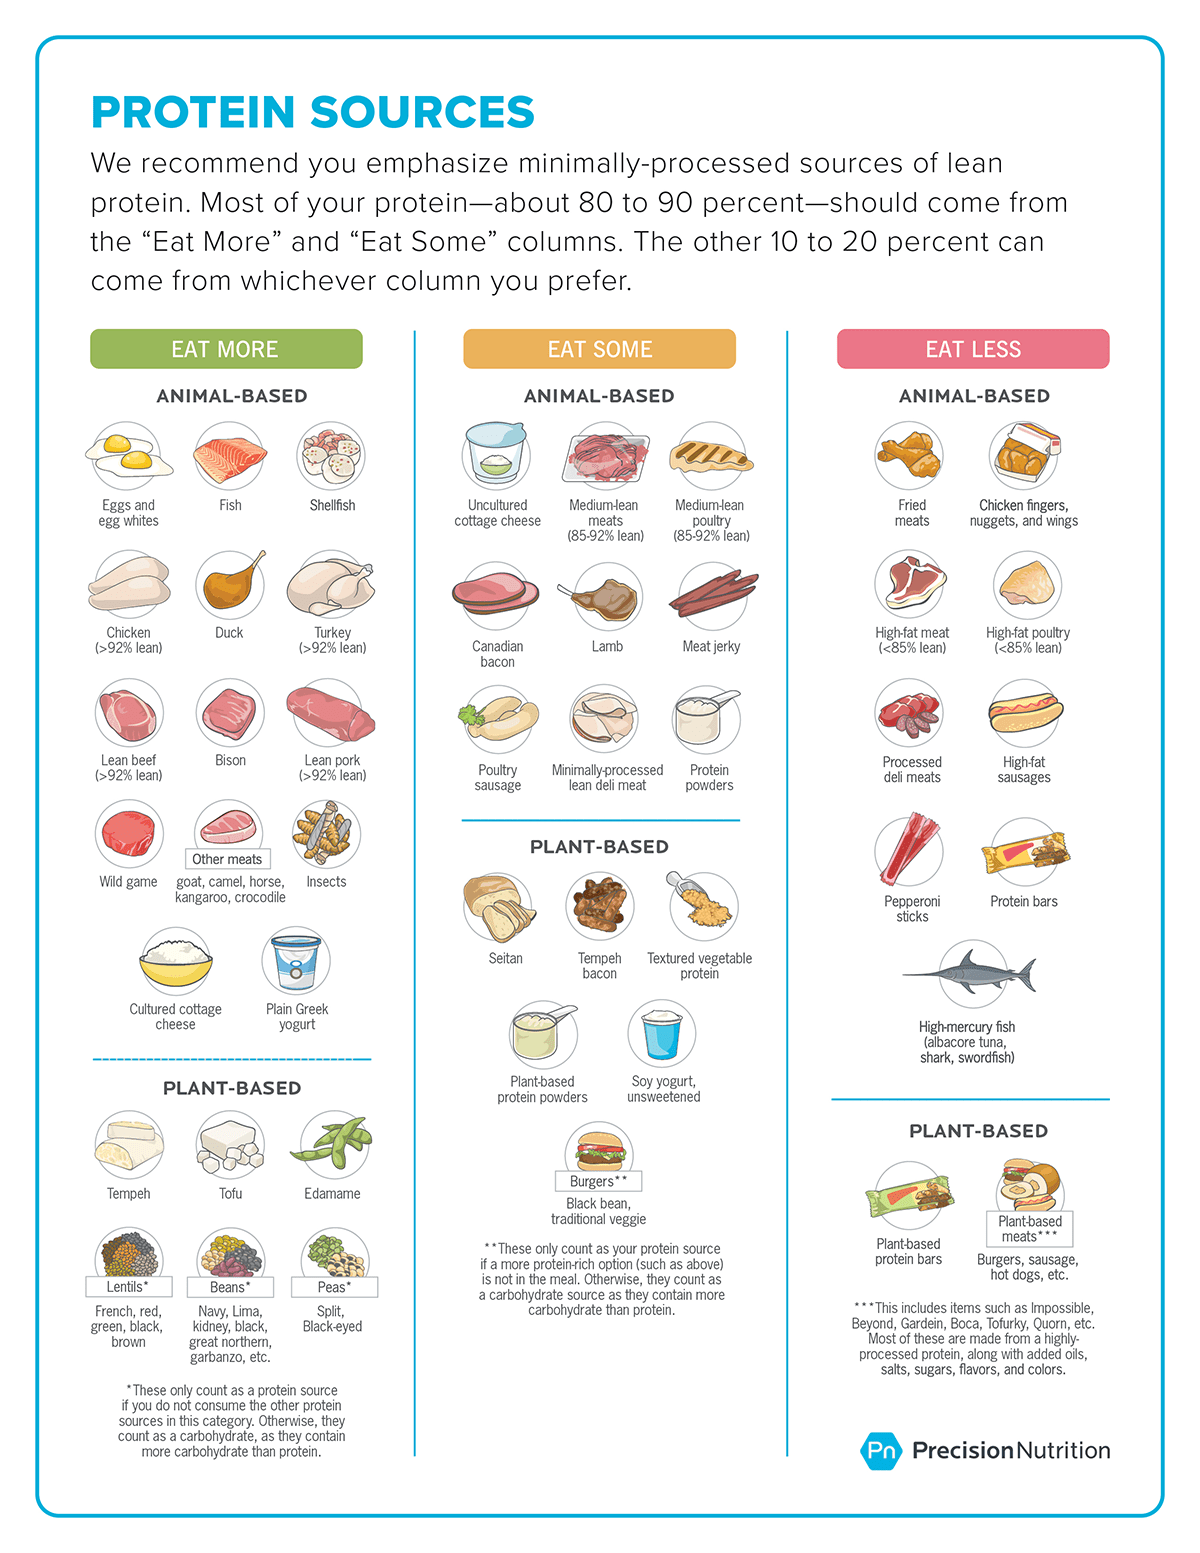 This sports nutrition food list provides the best protein foods for athletes. It categorizes proteins into “Eat More,” “Eat Some,” and “Eat Less.” You should prioritize fresh, lean sources of protein, and consider limiting red meat to ~18 ounces (4 palms) per week or less. Your goal: Most of your protein—about 80 to 90 percent—should come from the “Eat More” and “Eat Some” columns. The other 10 to 20 percent can come from whichever column you prefer. The “Eat More” protein food list includes (animal-based): eggs, egg whites, fish, shellfish, chicken, lean beef (>92% lean), duck, turkey (>92% lean), bison, lean pork (>92% lean), wild game, other meats (goat, camel, horse, kangaroo, crocodile), insects, cultured cottage cheese, plain Greek yogurt. The “Eat More” protein food list also includes (plant-based): tempeh, tofu, edamame, lentils, beans, peas. Note: beans only count as a protein source if you do not consume the other protein sources in the category. Otherwise, they count as a carbohydrate, as they contain more carbohydrate than protein. The “Eat Some” protein food list includes (animal-based): uncultured cottage cheese, medium-lean meats (85-92% lean), medium-lean poultry (85-92% lean), Canadian bacon, lamb, meat jerky, poultry sausage, minimally-processed lean deli meat, protein powders. The “Eat Some” protein food list also includes (plant-based): seitan, tempeh bacon, textured vegetable protein, plant-based protein powders, soy yogurt (unsweetened), black bean burgers, veggie burgers. Black bean and veggie burgers only count as your protein source if a more protein-rich option is not in the meal. Otherwise, they count as a carbohydrate source as they contain more carbohydrate than protein. The “Eat Less” protein food list includes (animal-based): fried meats, chicken fingers, nuggets, and wings, high-fat meat (